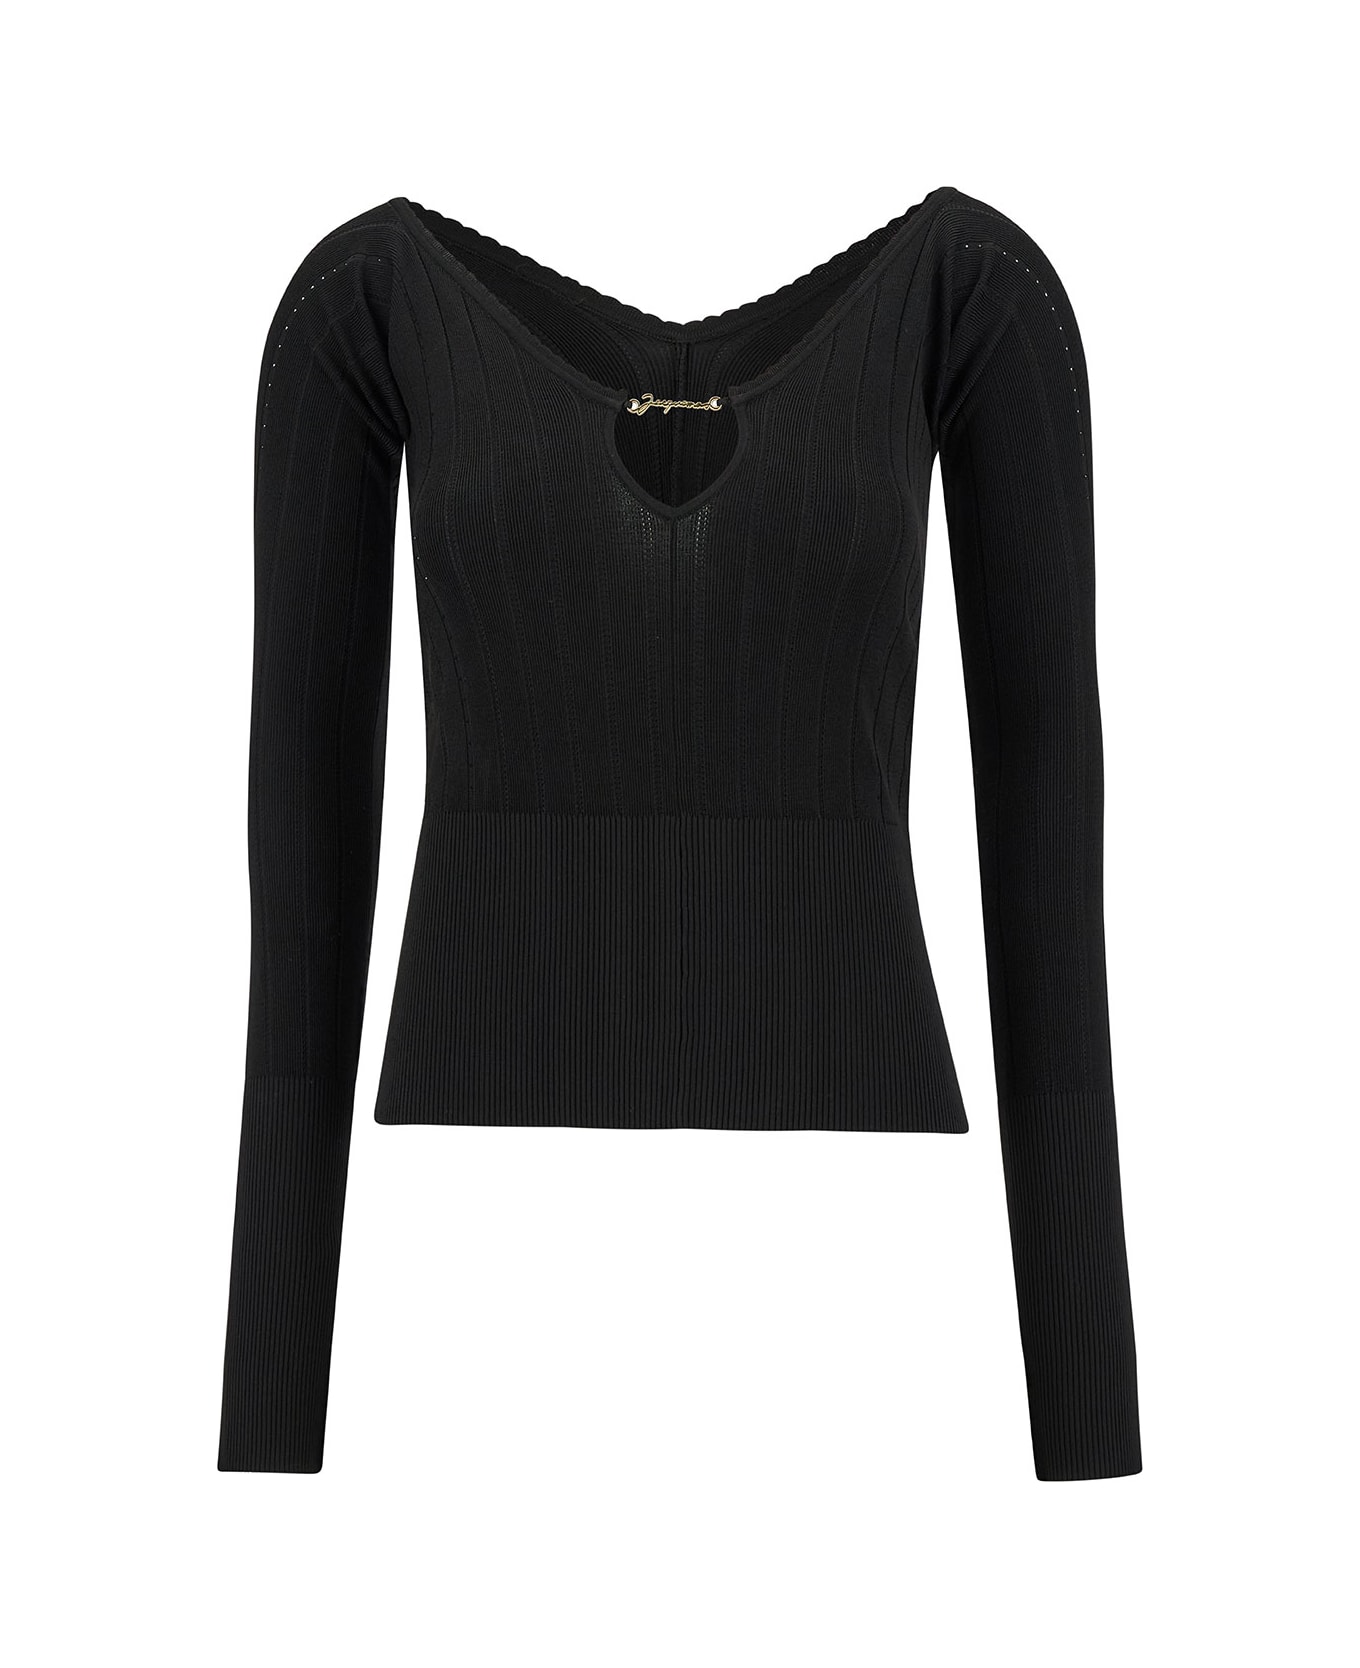 Jacquemus Black Long Sleeve Top With Logo Detail And Cut-out In Viscose Blend Woman - Black